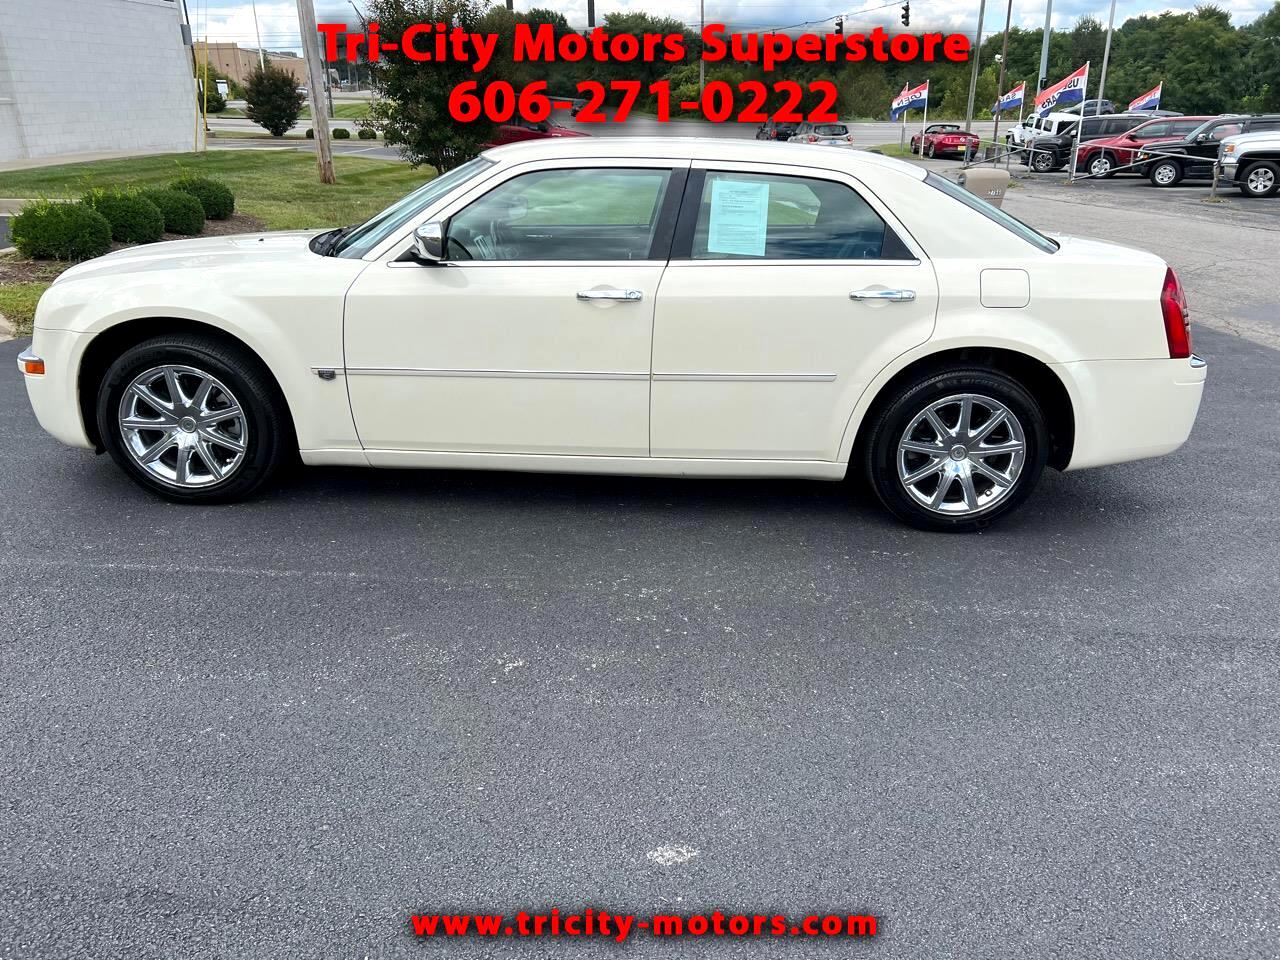 Used 2007 Chrysler 300 4dr Sdn 300C RWD for Sale in Somerset KY 42501  Tri-City Motors Superstore